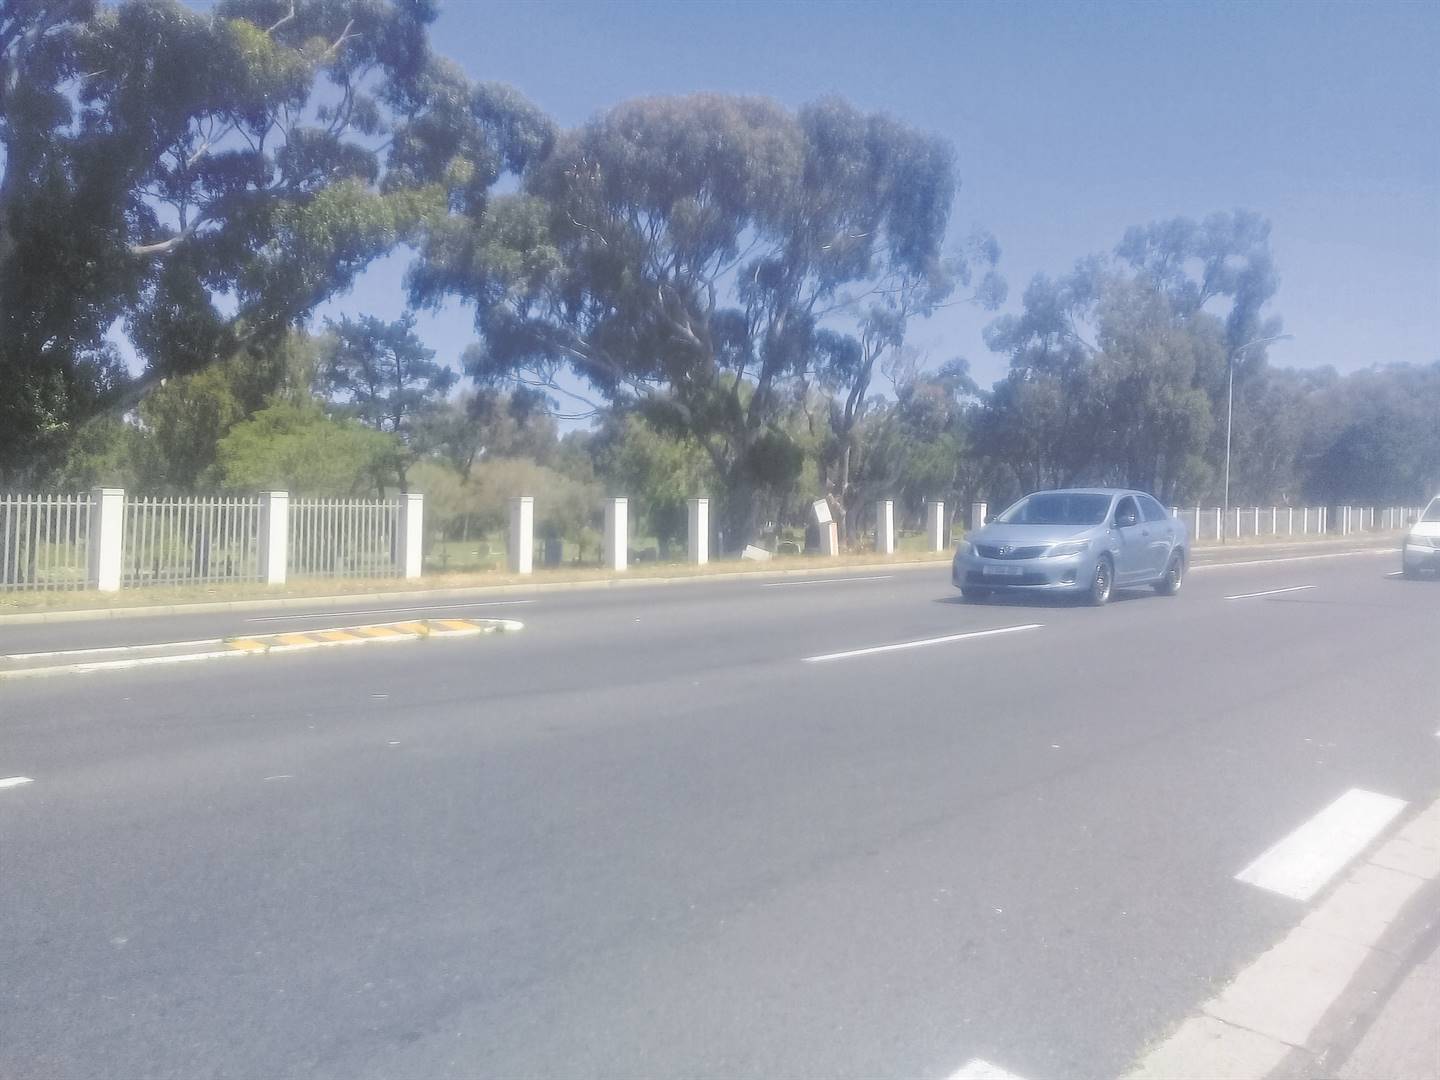 The association upset by the Voortrekker Road plans